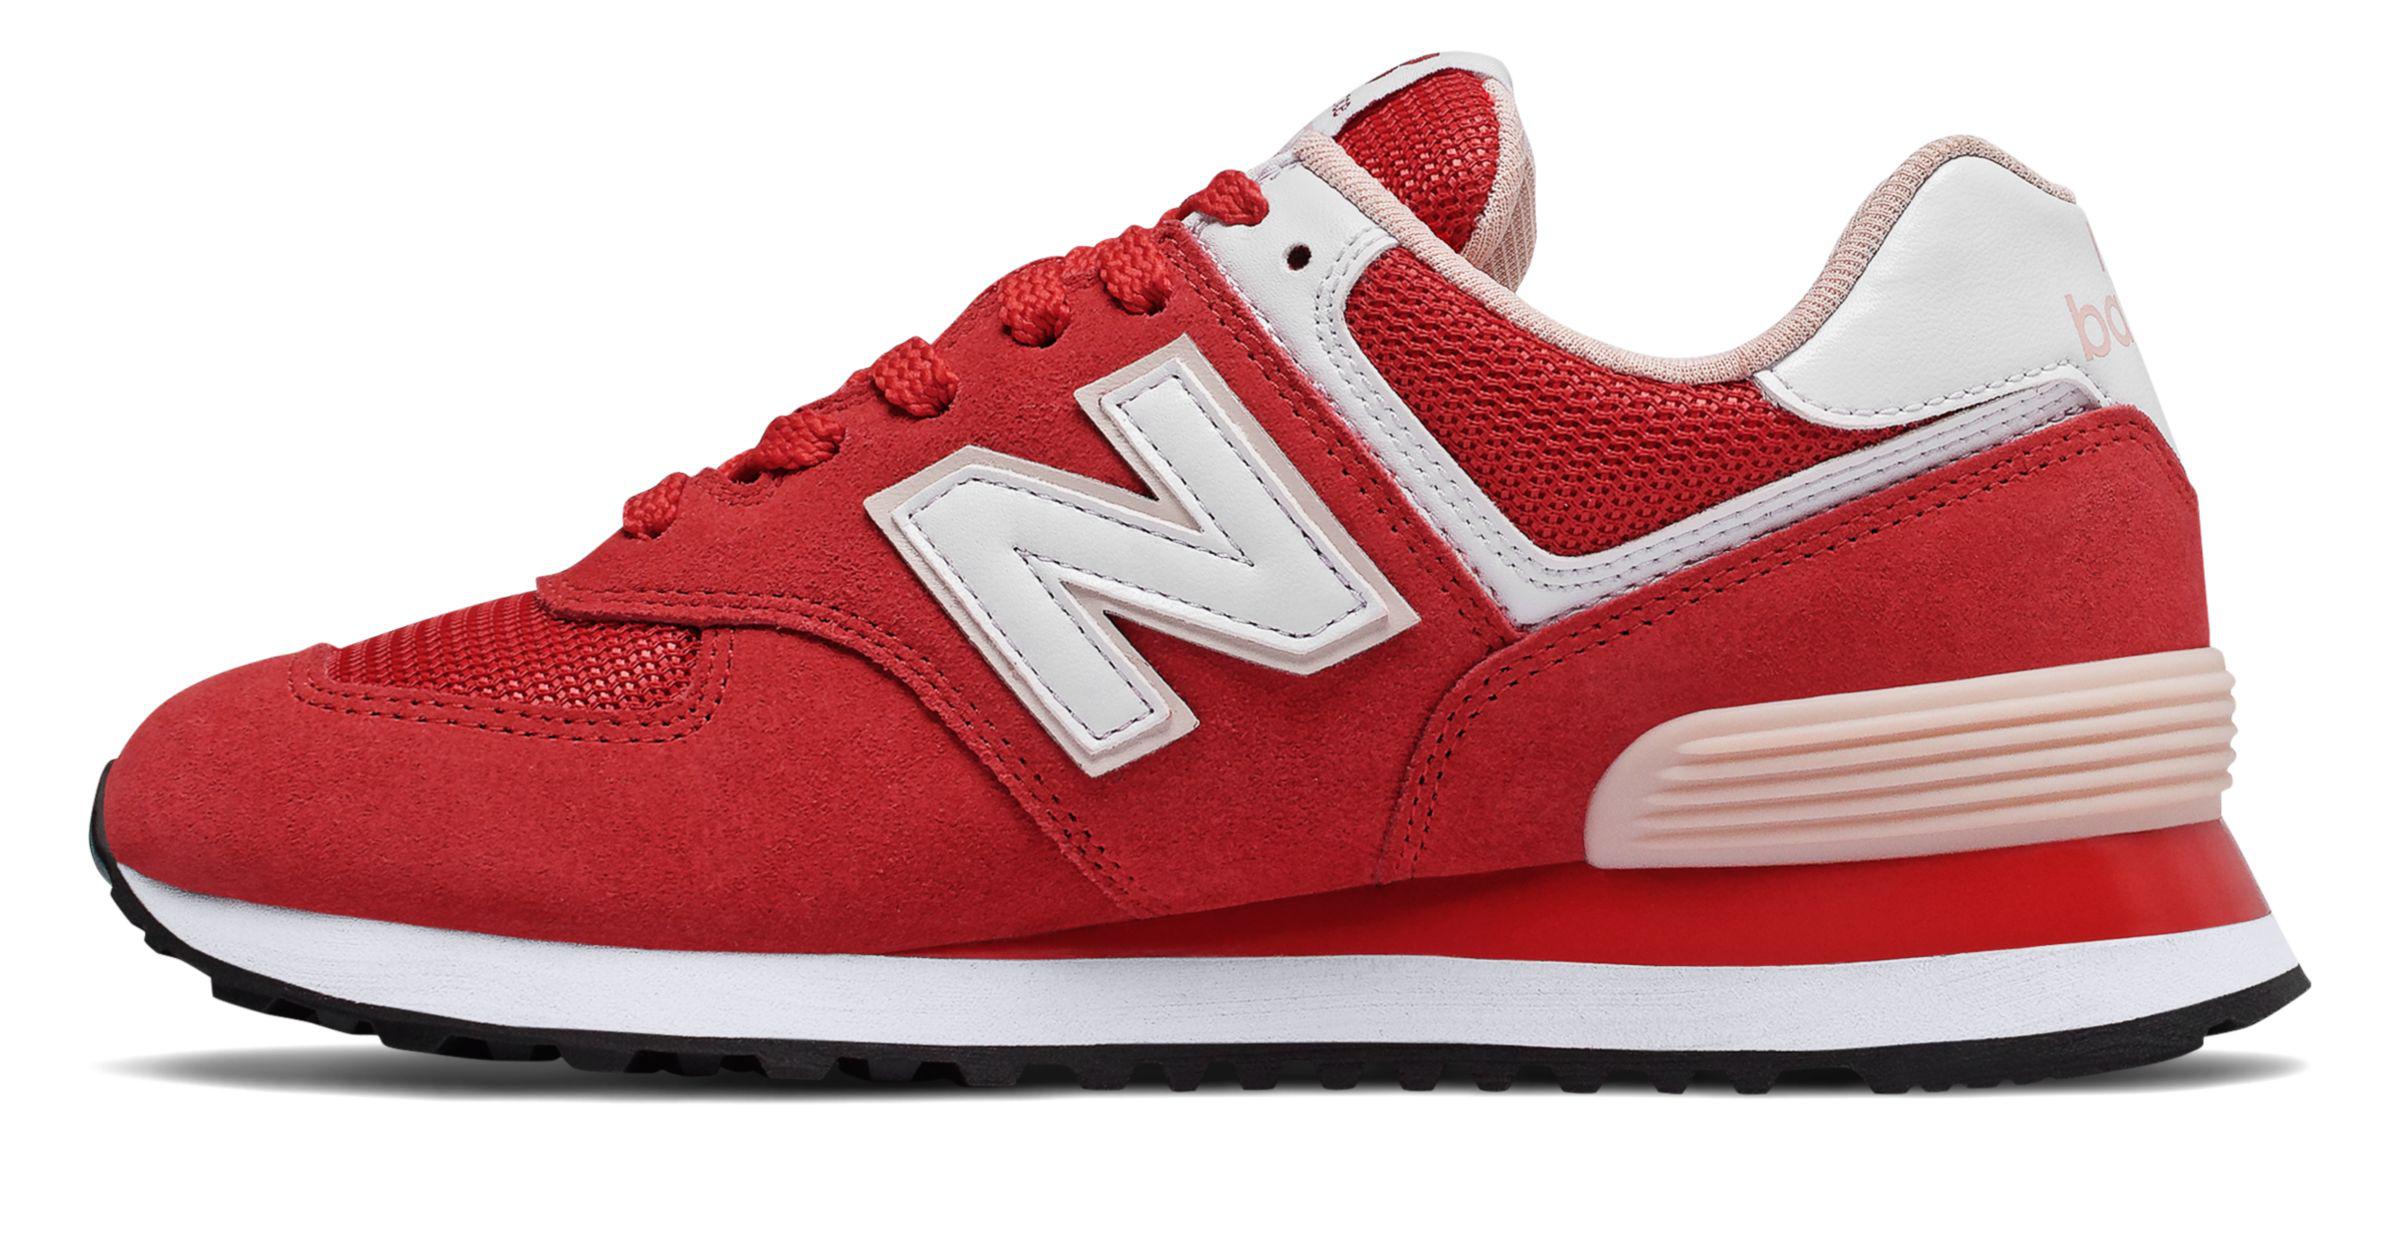 New Balance Suede 574 Valentines Day in 